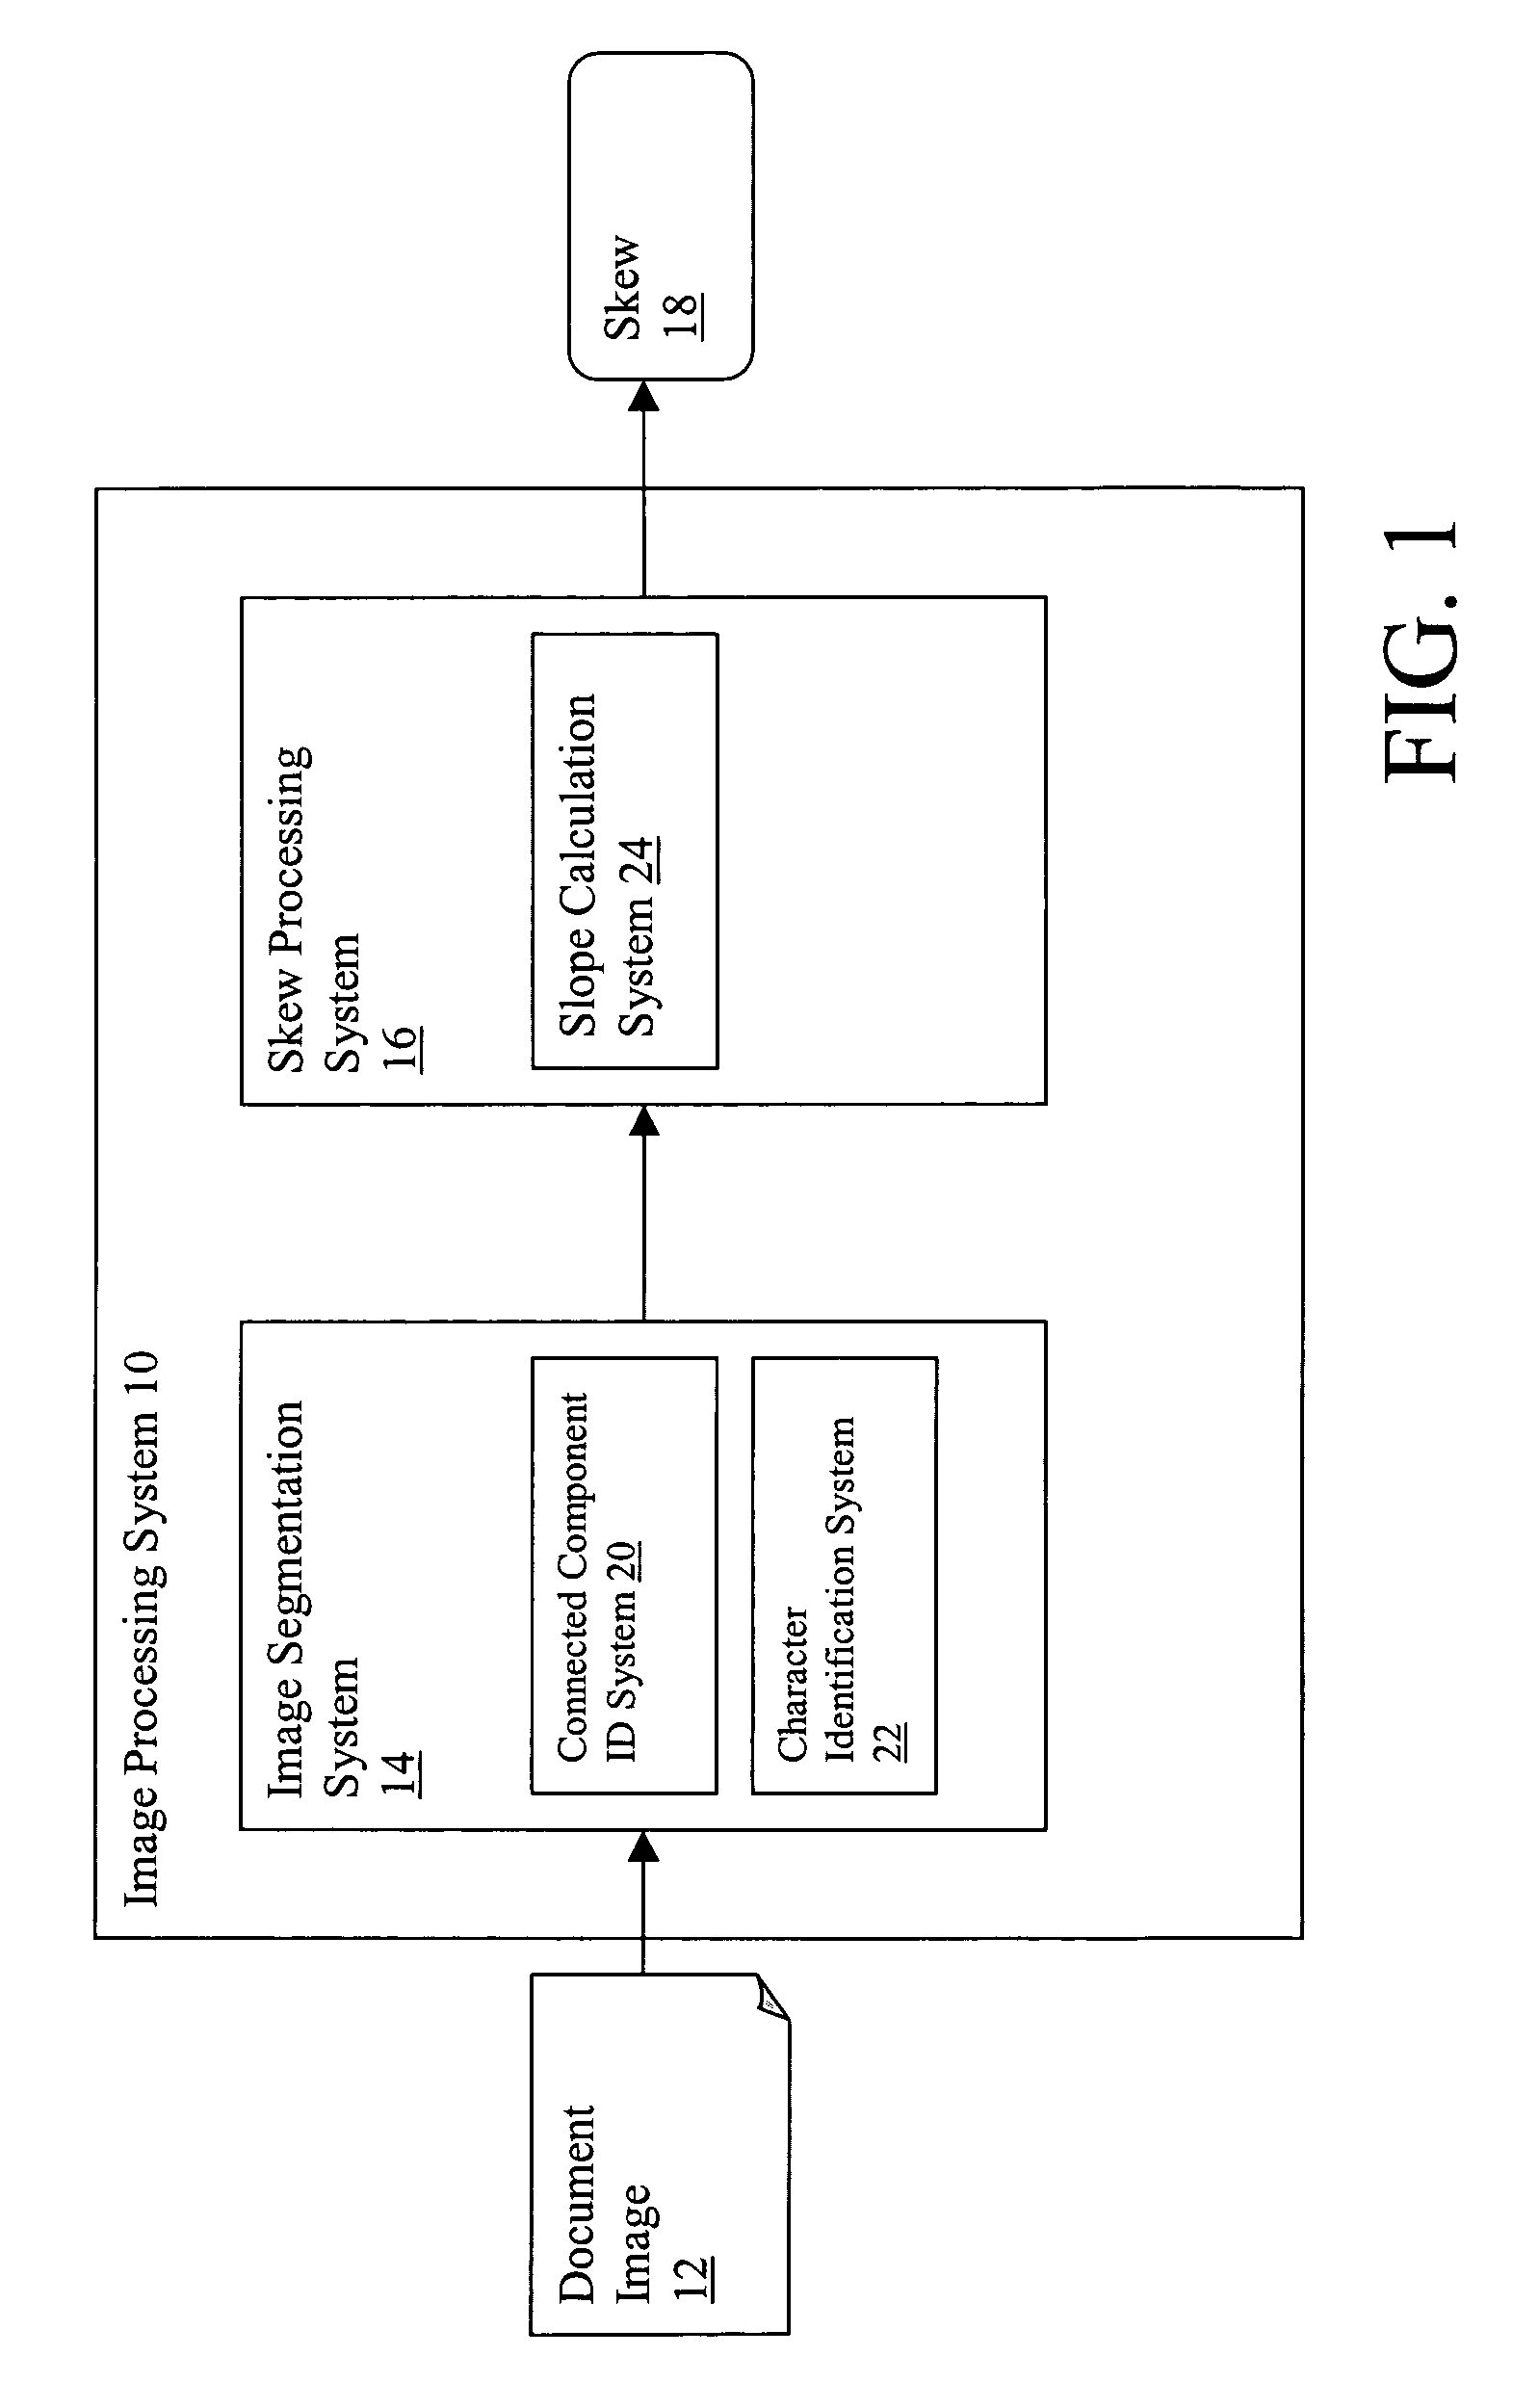 System and method of determining image skew using connected components